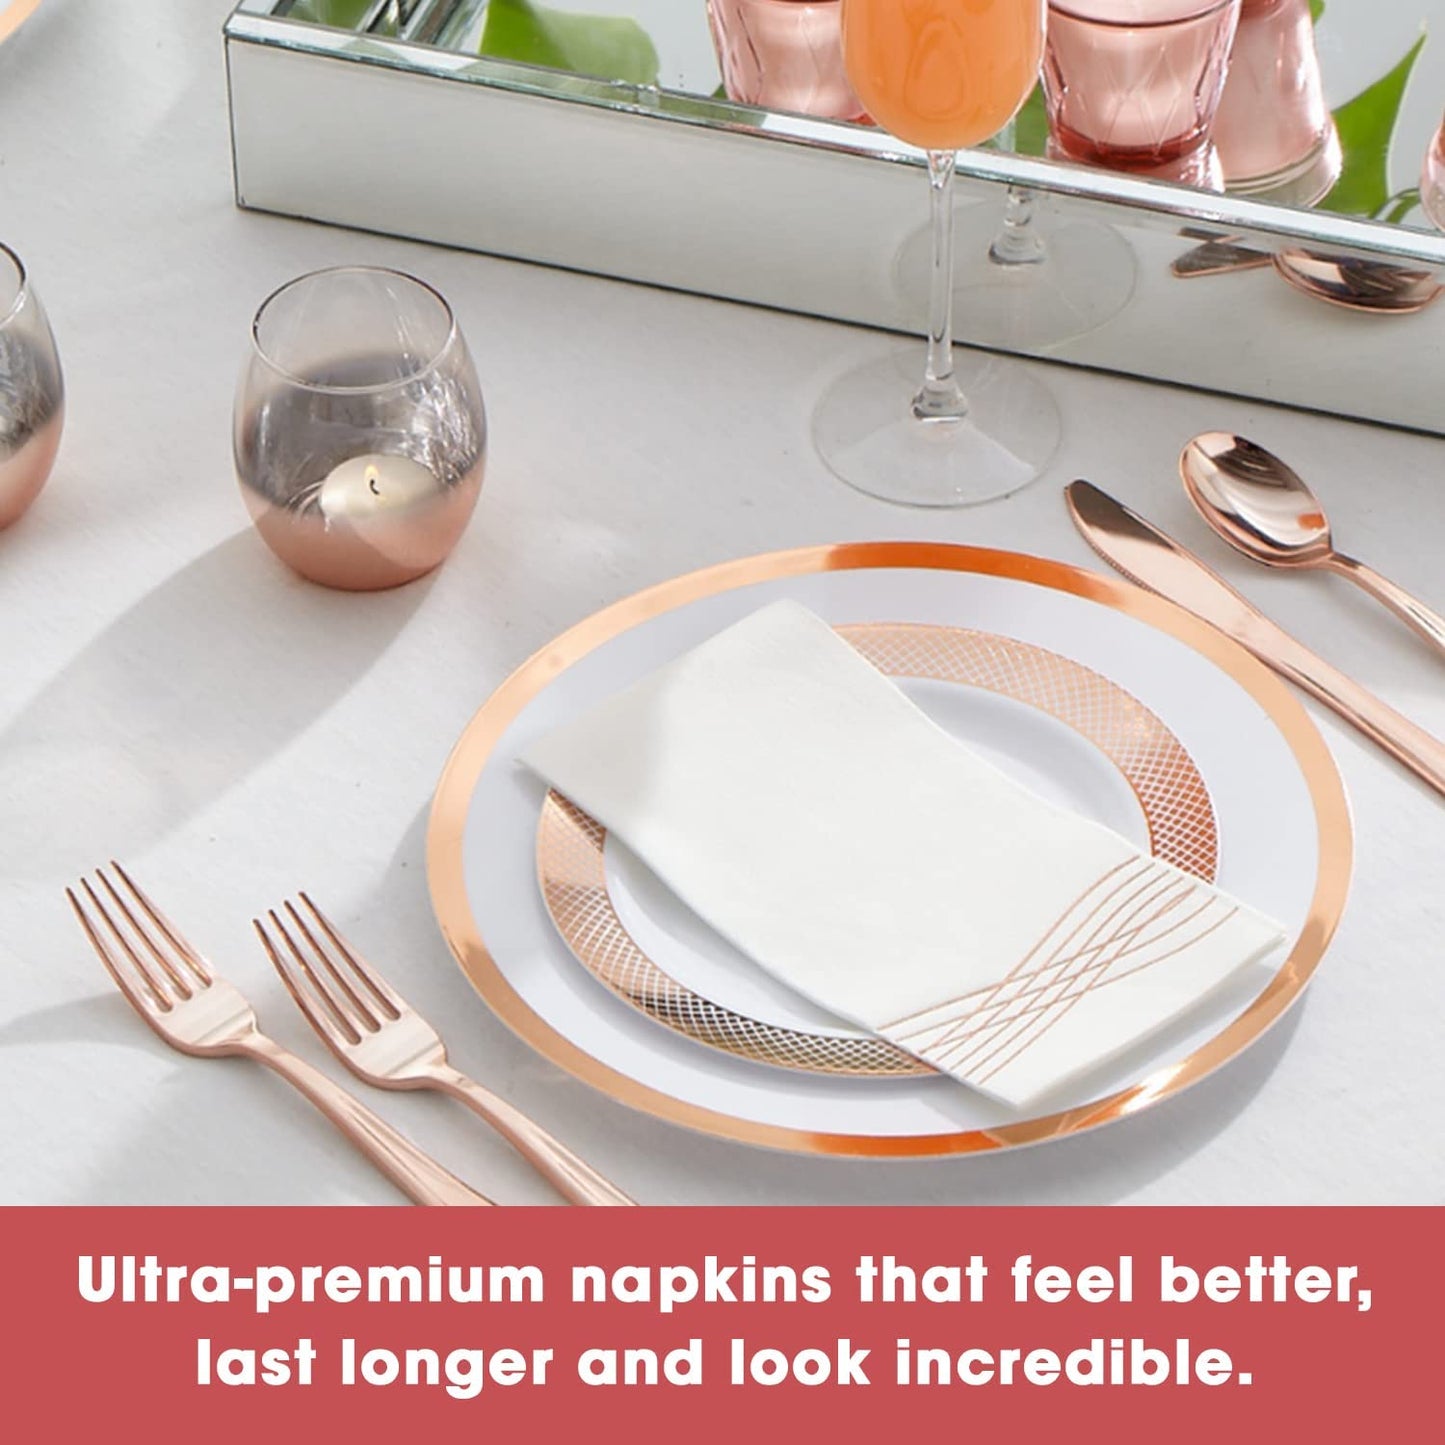 Rose Gold Fancy Paper Napkins, Perfect Disposable Guest Hand Towels for Bathrooms (8.5" x 4" Rose Gold Wavy 50 Pack)